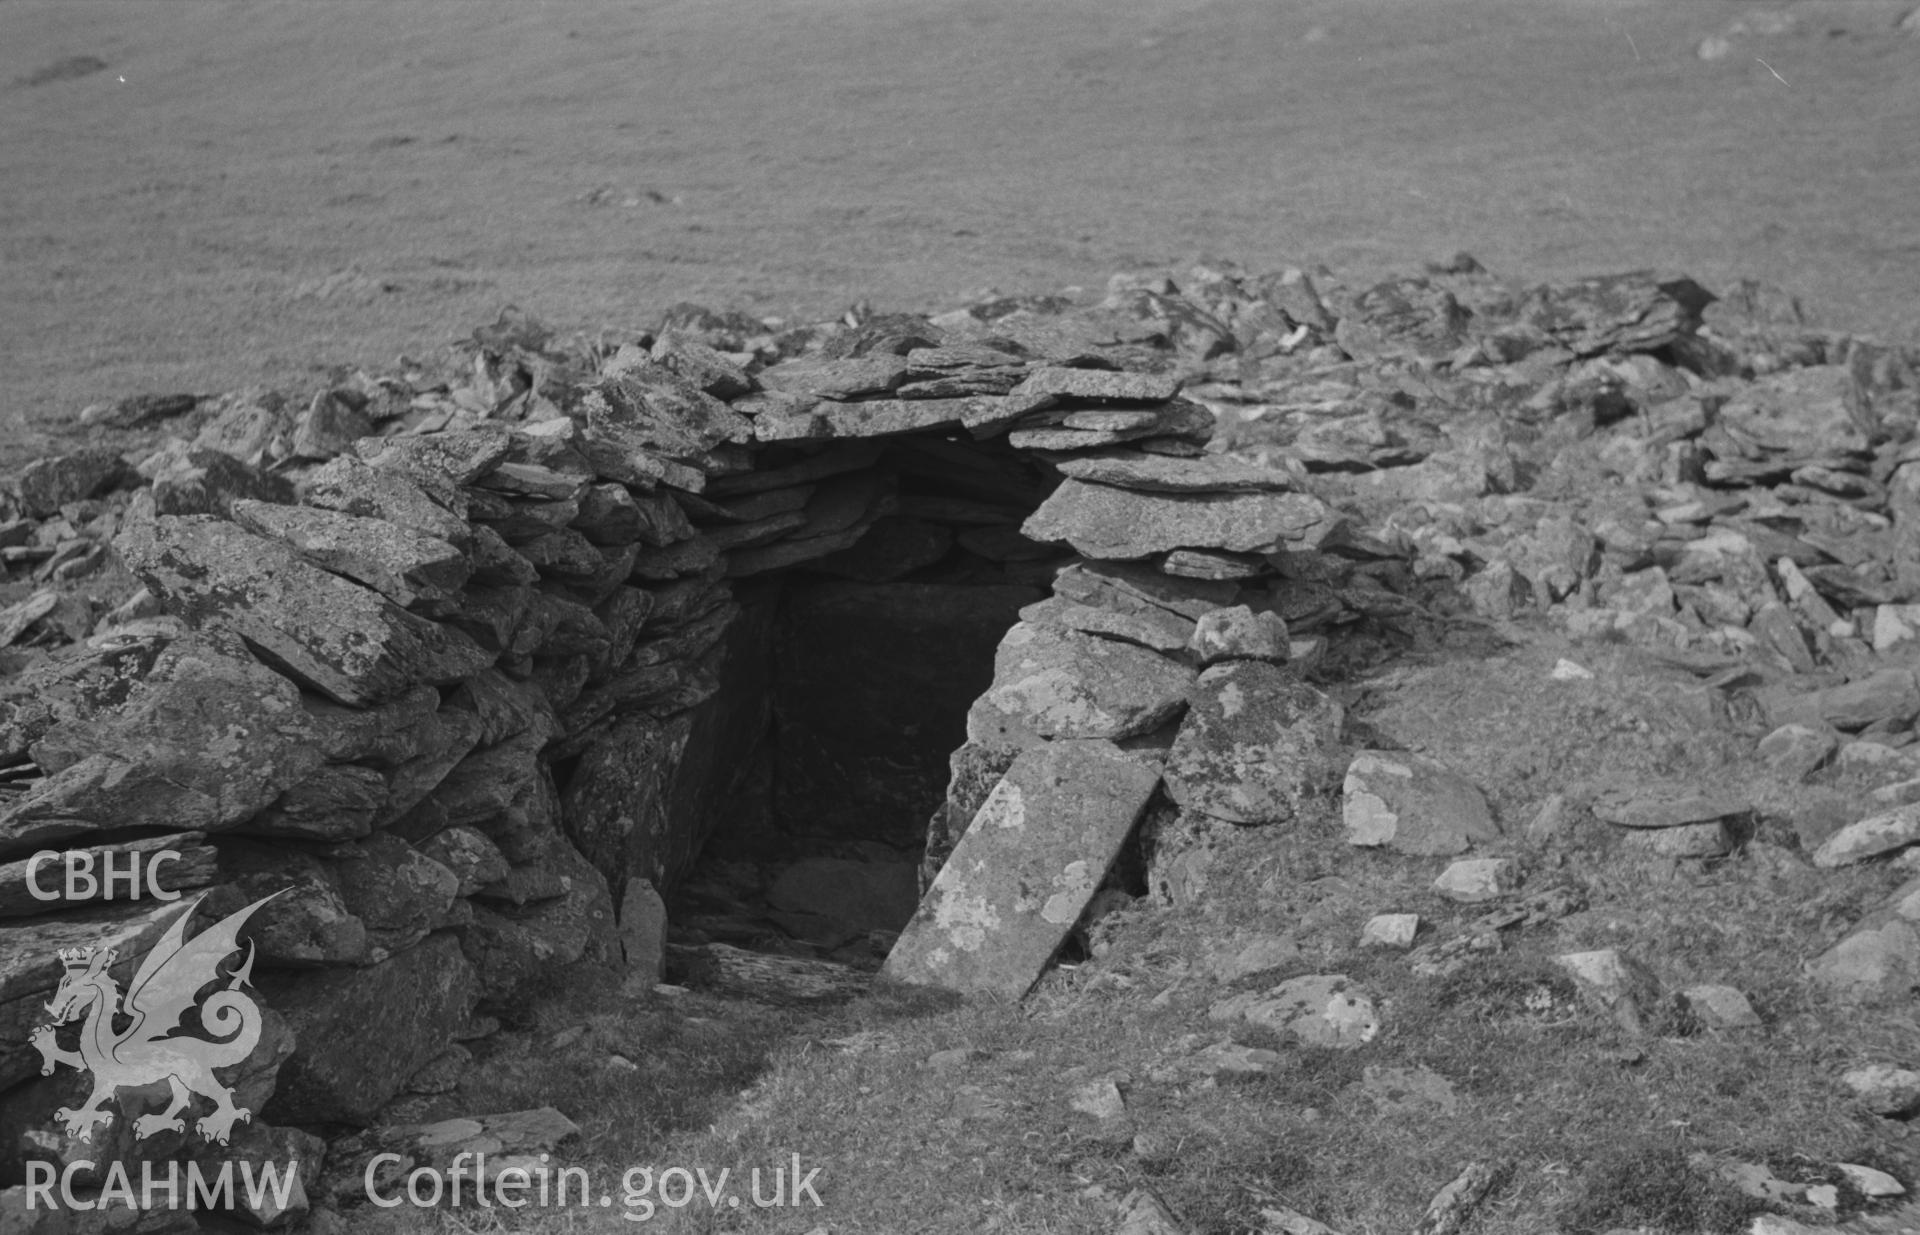 Black and White photograph showing drystone structure by the cairn at 1150ft, 500m west of Castell Rhyfel, presumably built of stones from the cairn. Photographed by Arthur Chater in April 1962 from Grid Reference SN 726 599, looking north.